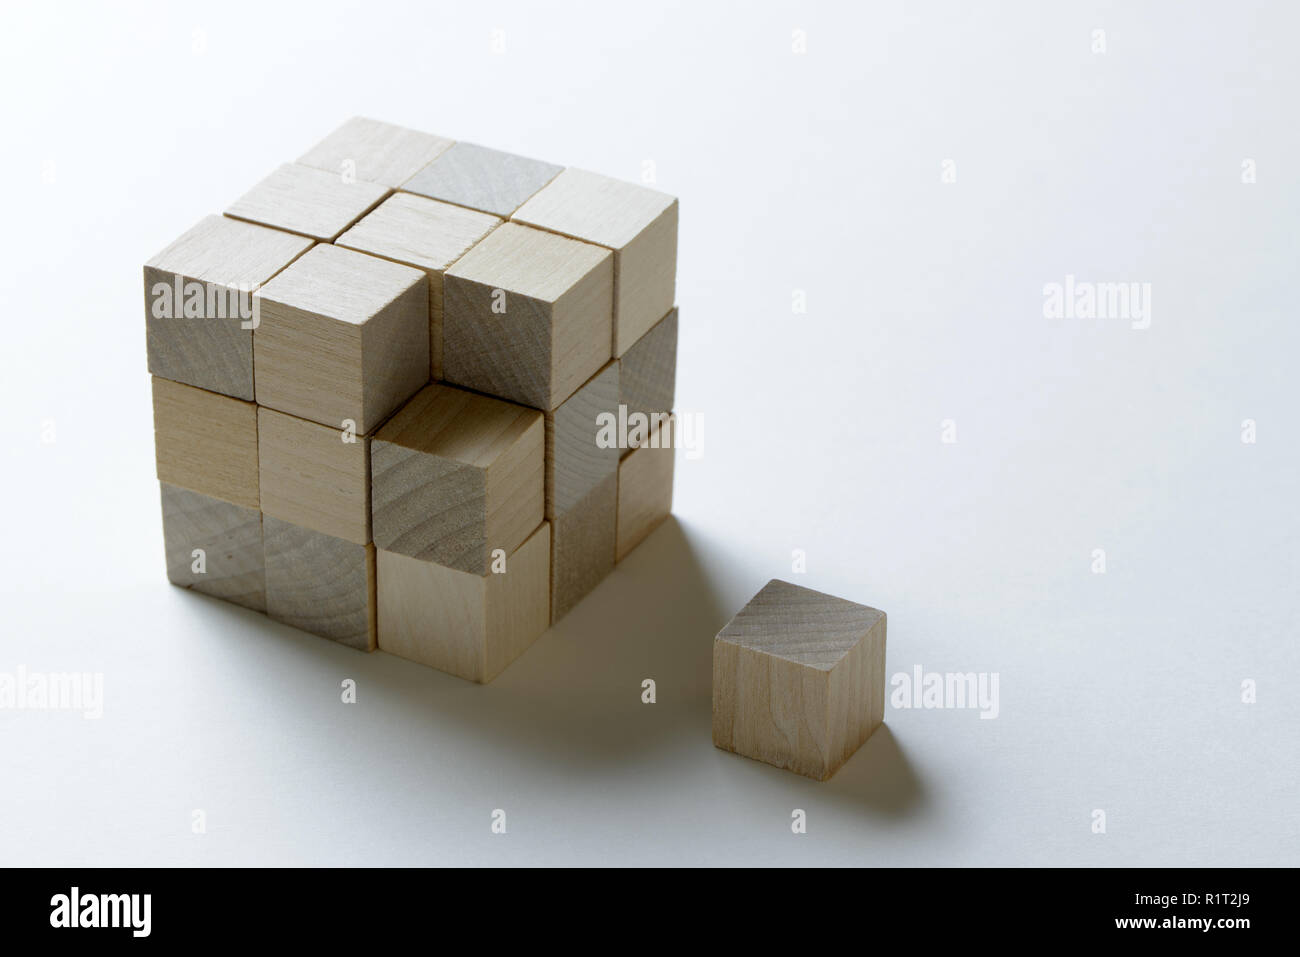 Last missing piece wood cube to complete Stock Photo